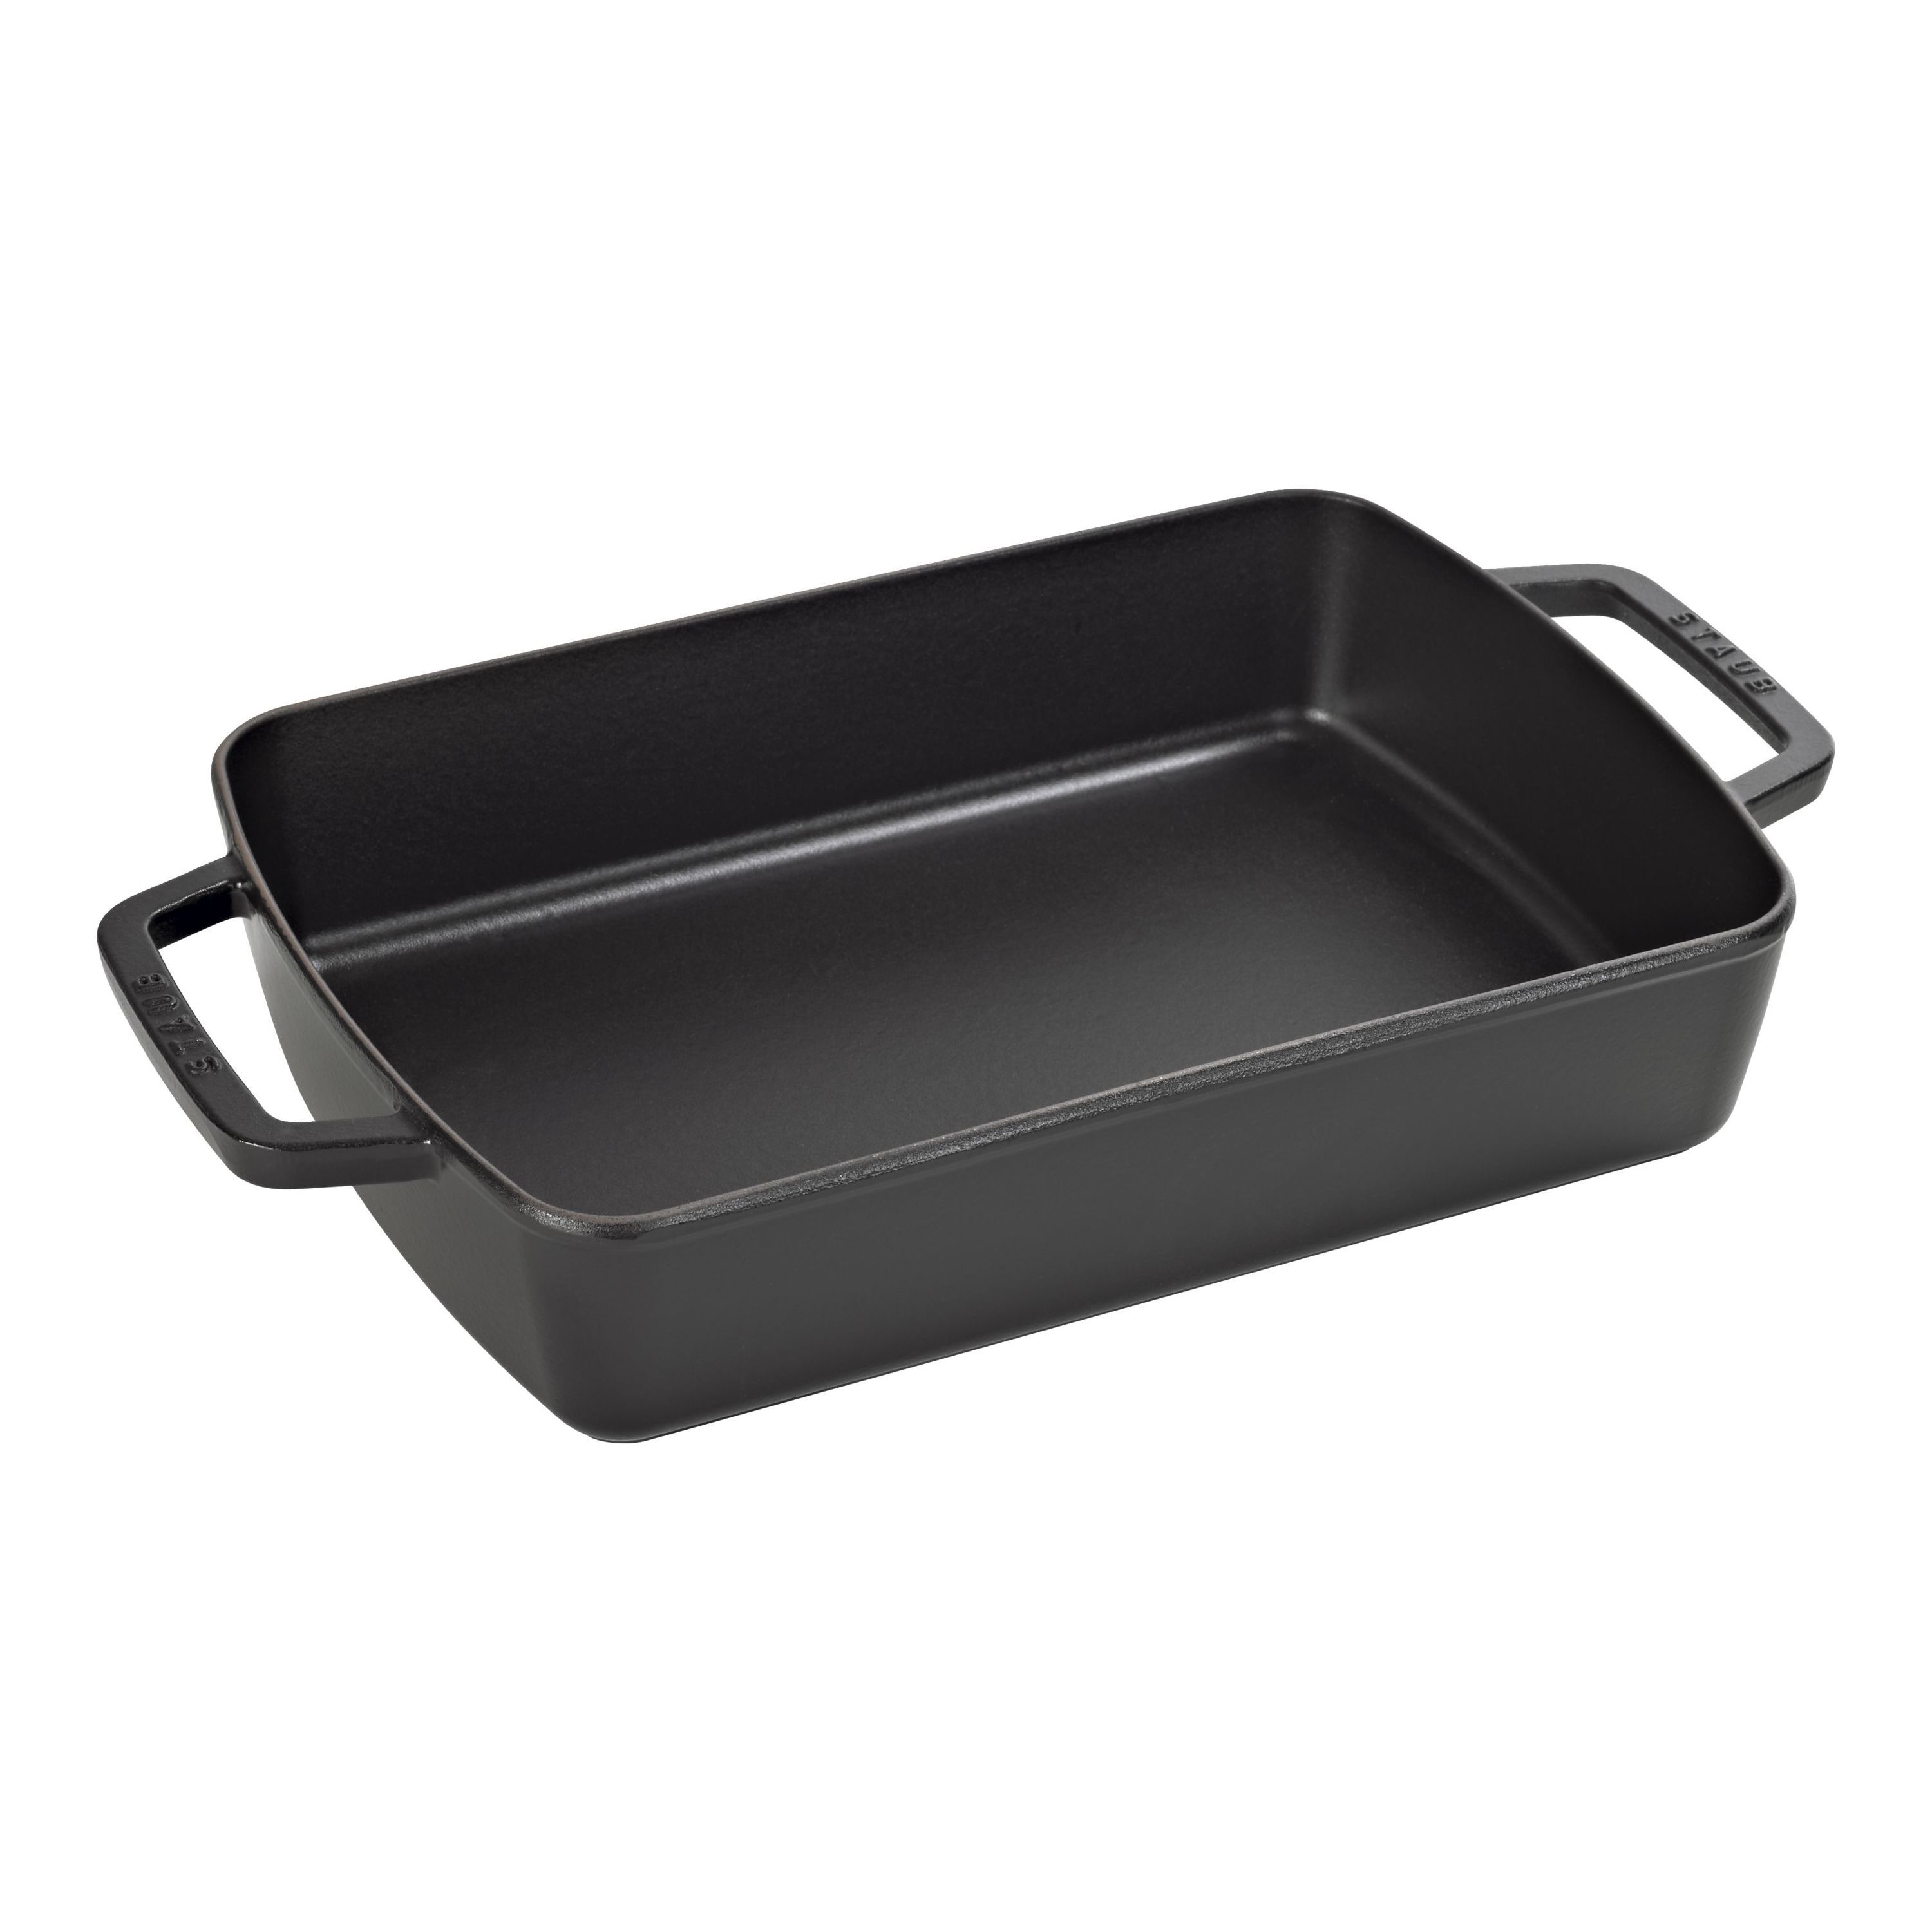 BAKING TRAY STAINLESS STEEL DEEP ROASTING OVEN PAN GRILL BAKE COOK DISH 30CM 